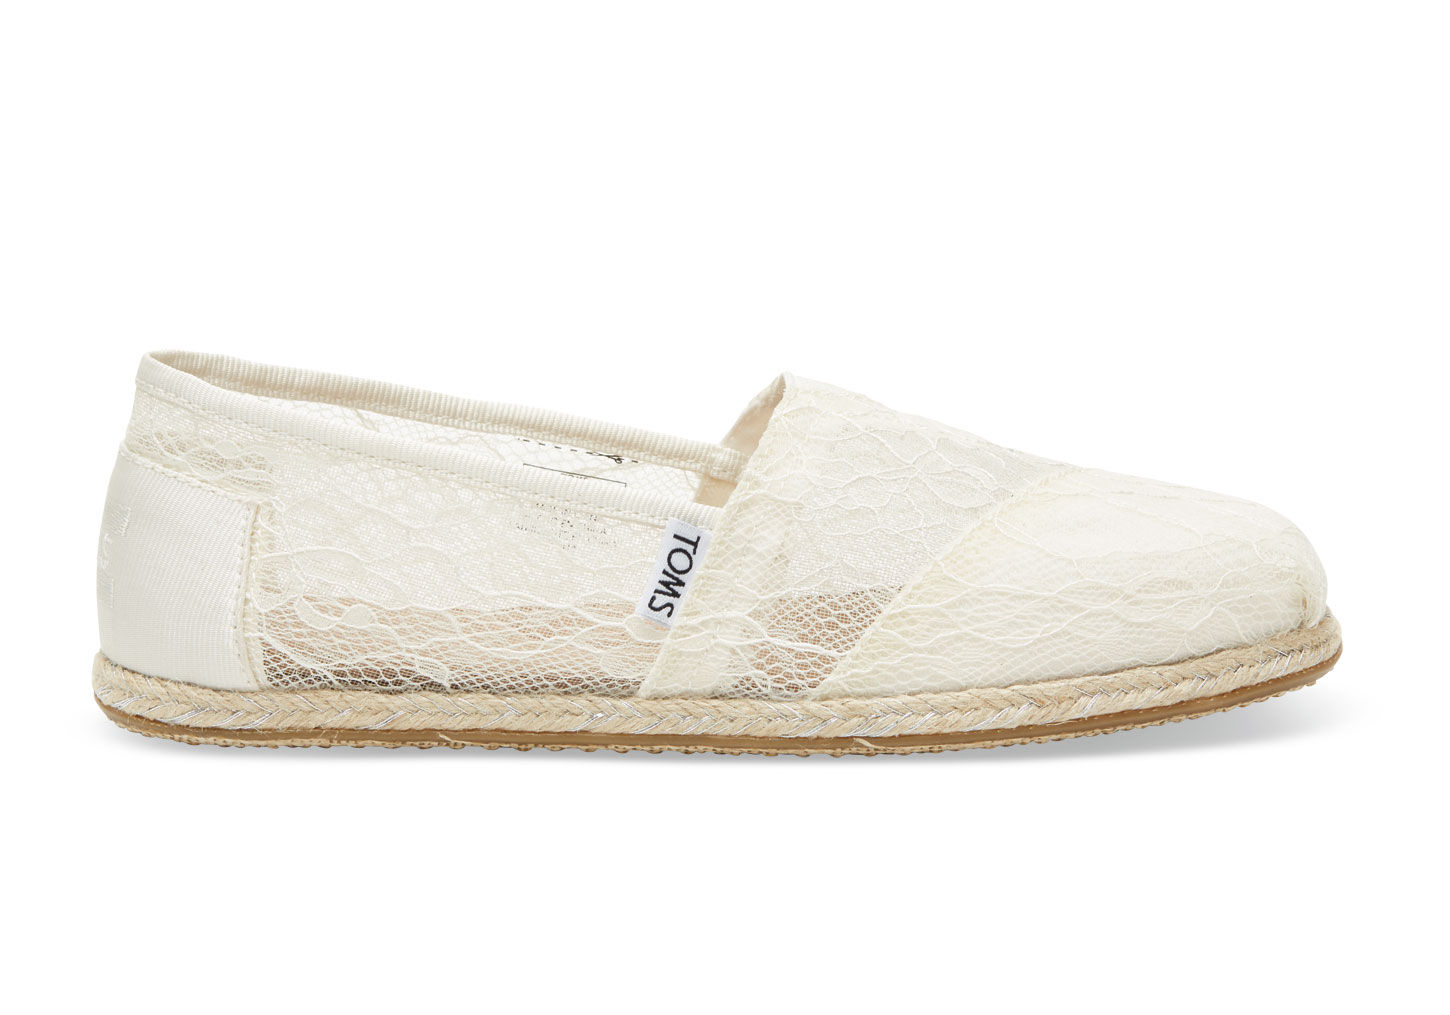 TOMS White Lace Rope Women's Classics - Lyst